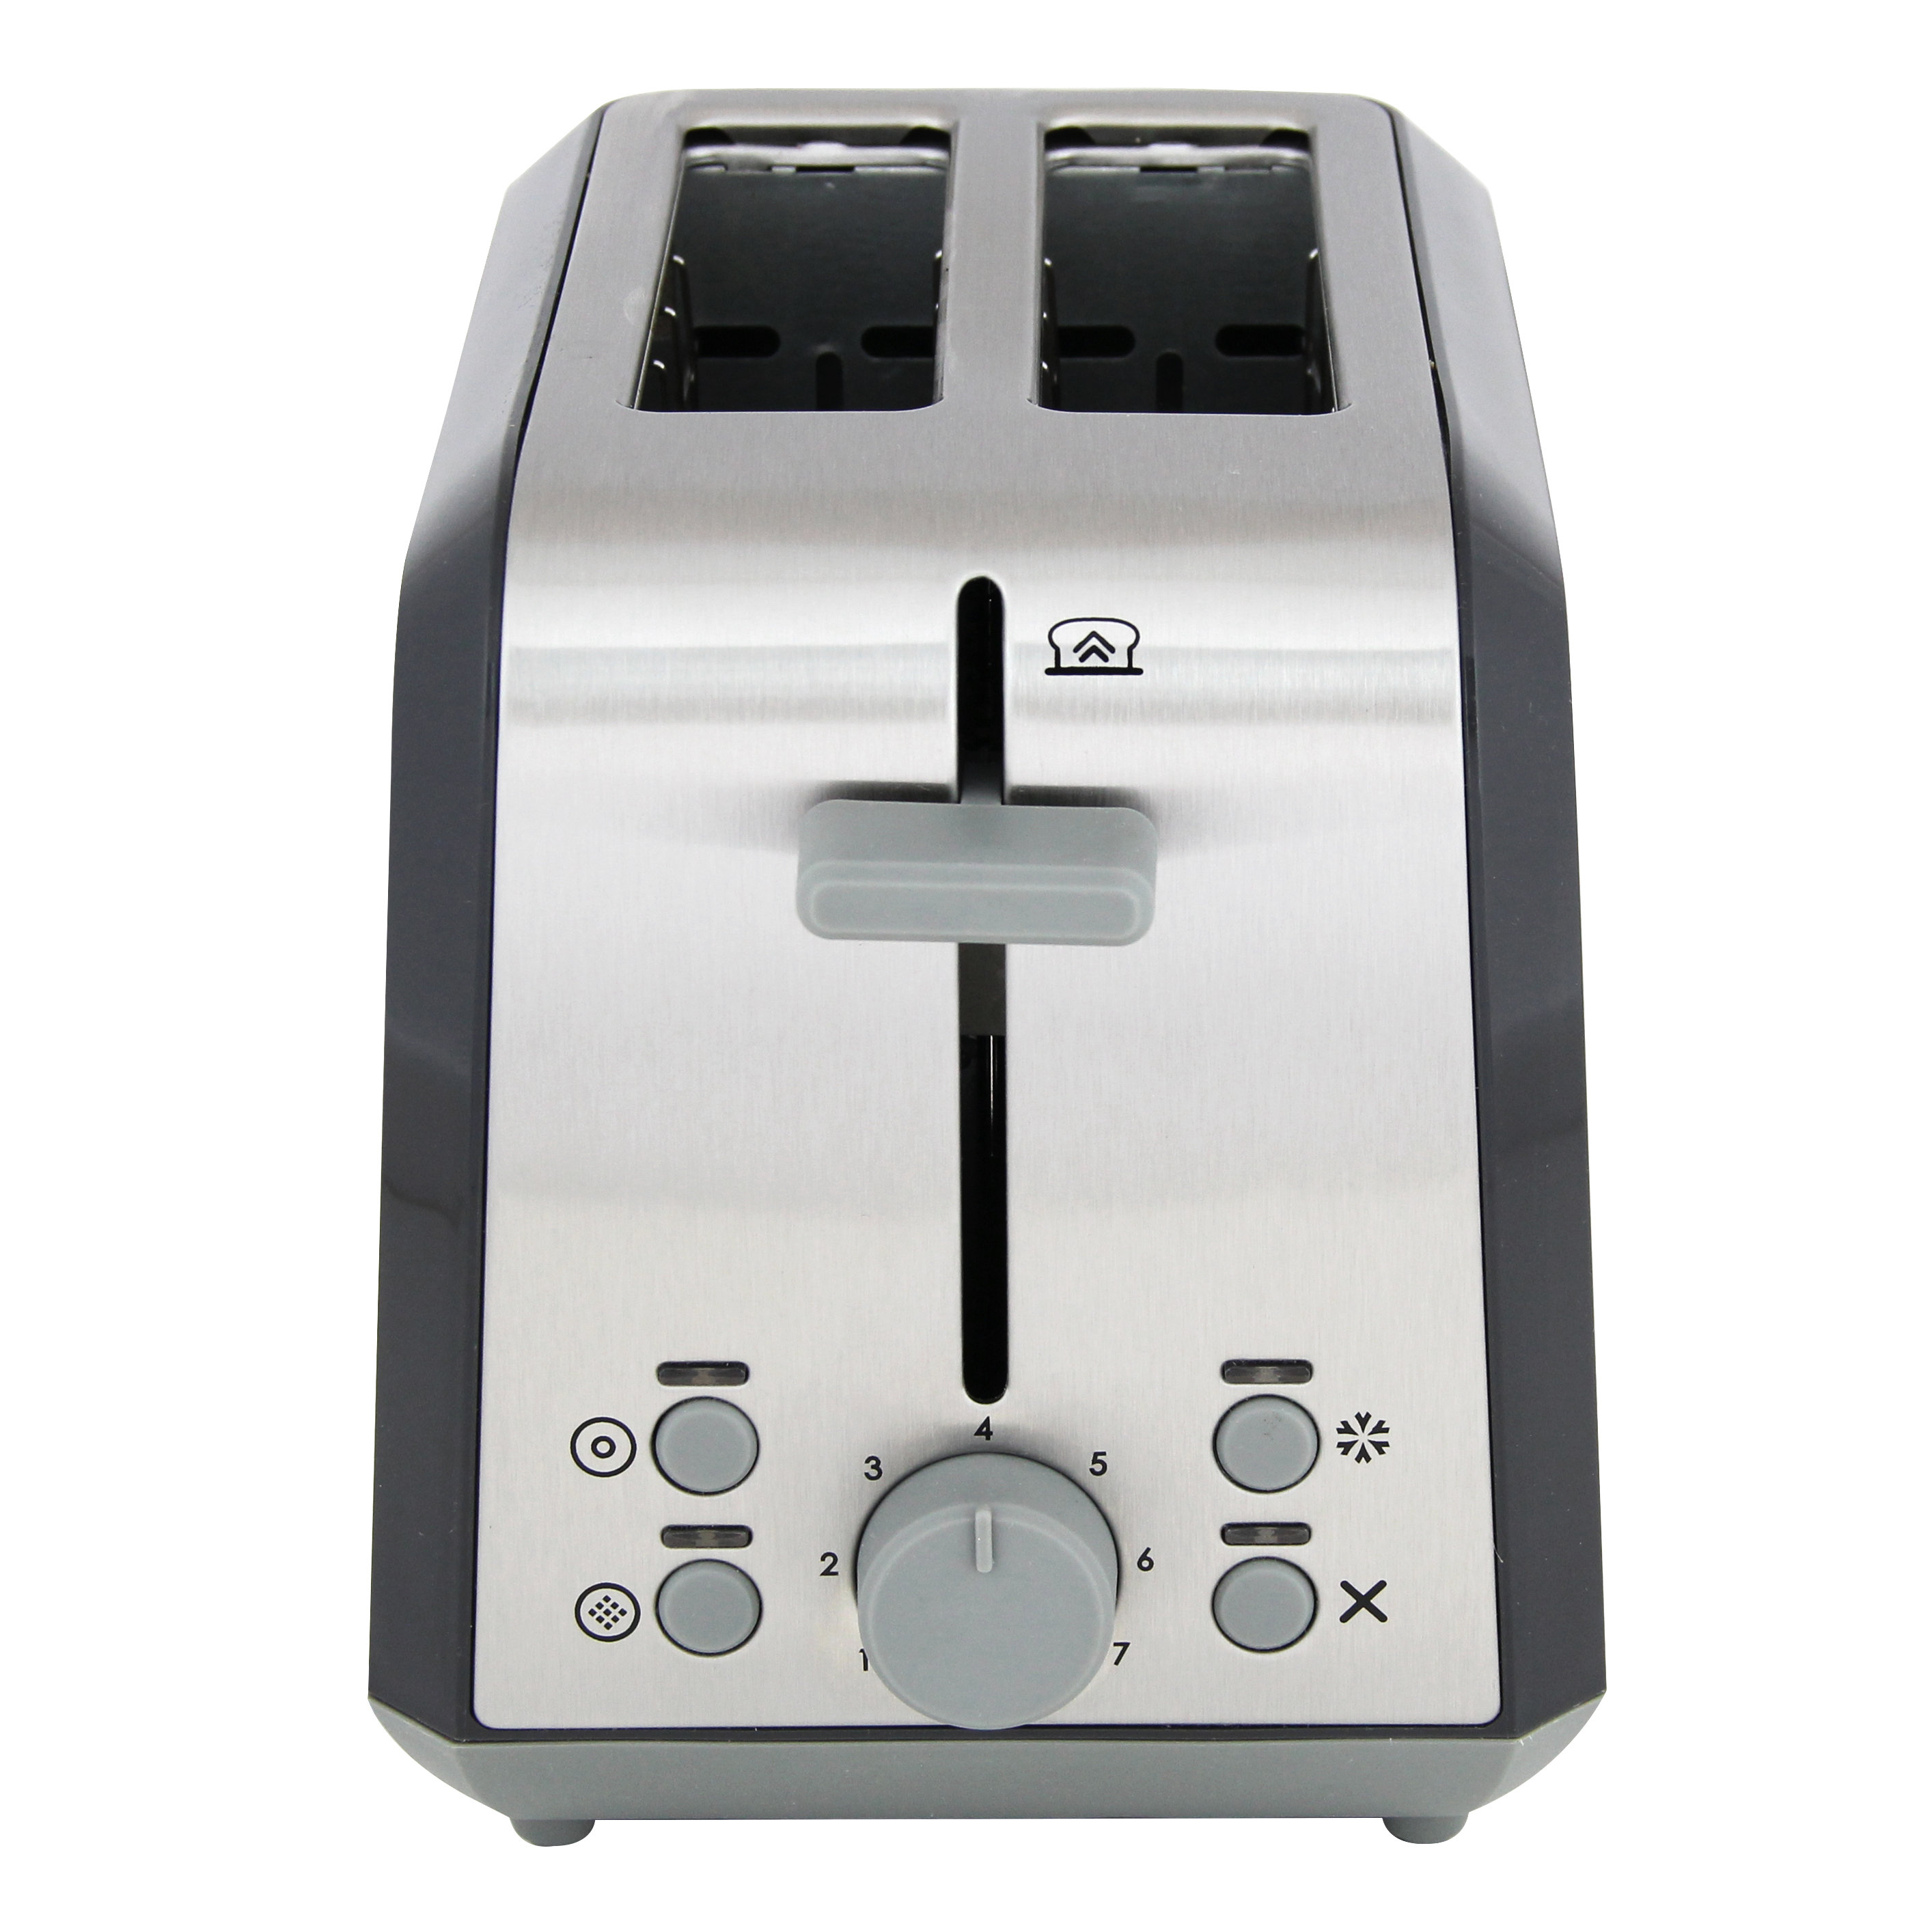 West Bend 2-Slice Toaster with Anti-Jam and Auto-Shut-Off, in Black/Stainless  Steel (78823)